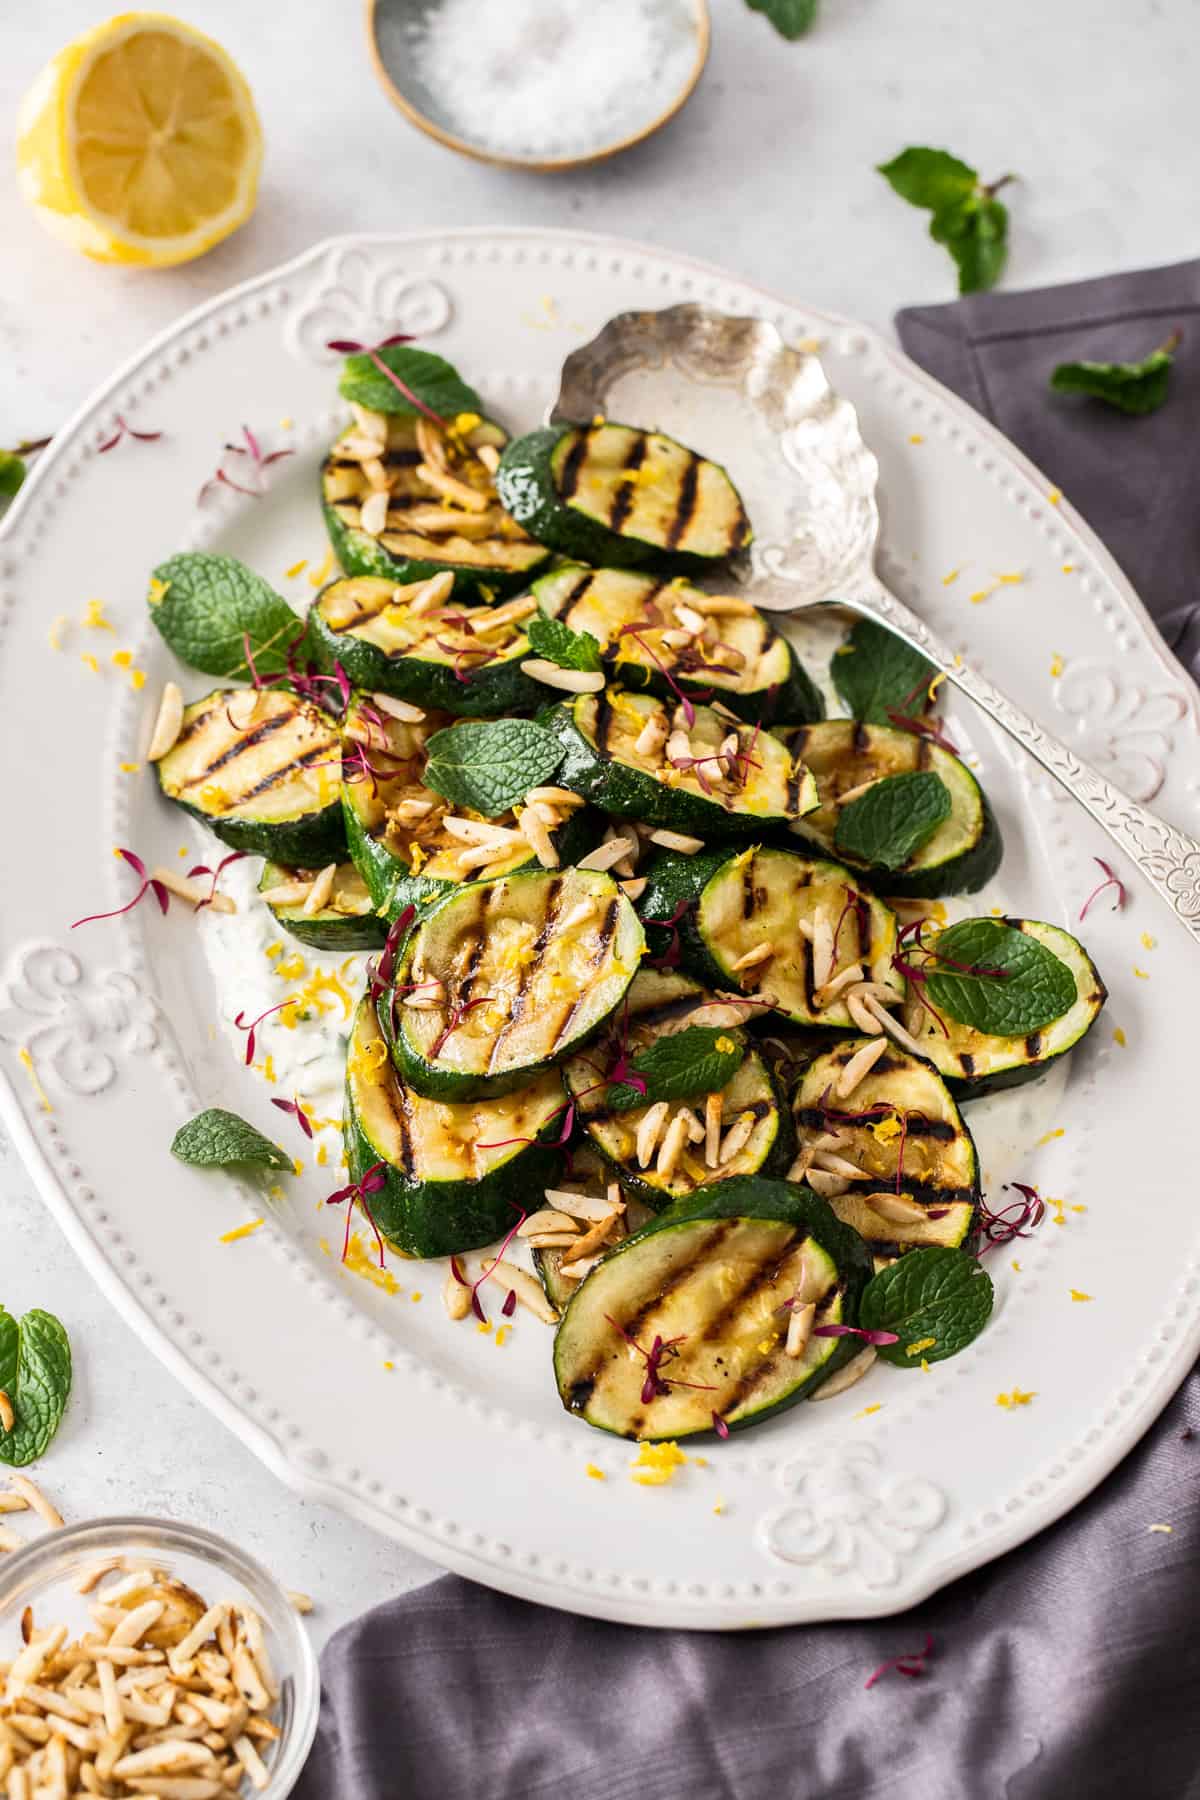 Oval white platter with grilled zucchini, garnished with slivered almonds, with a silver serving spoon on edge of the plate.